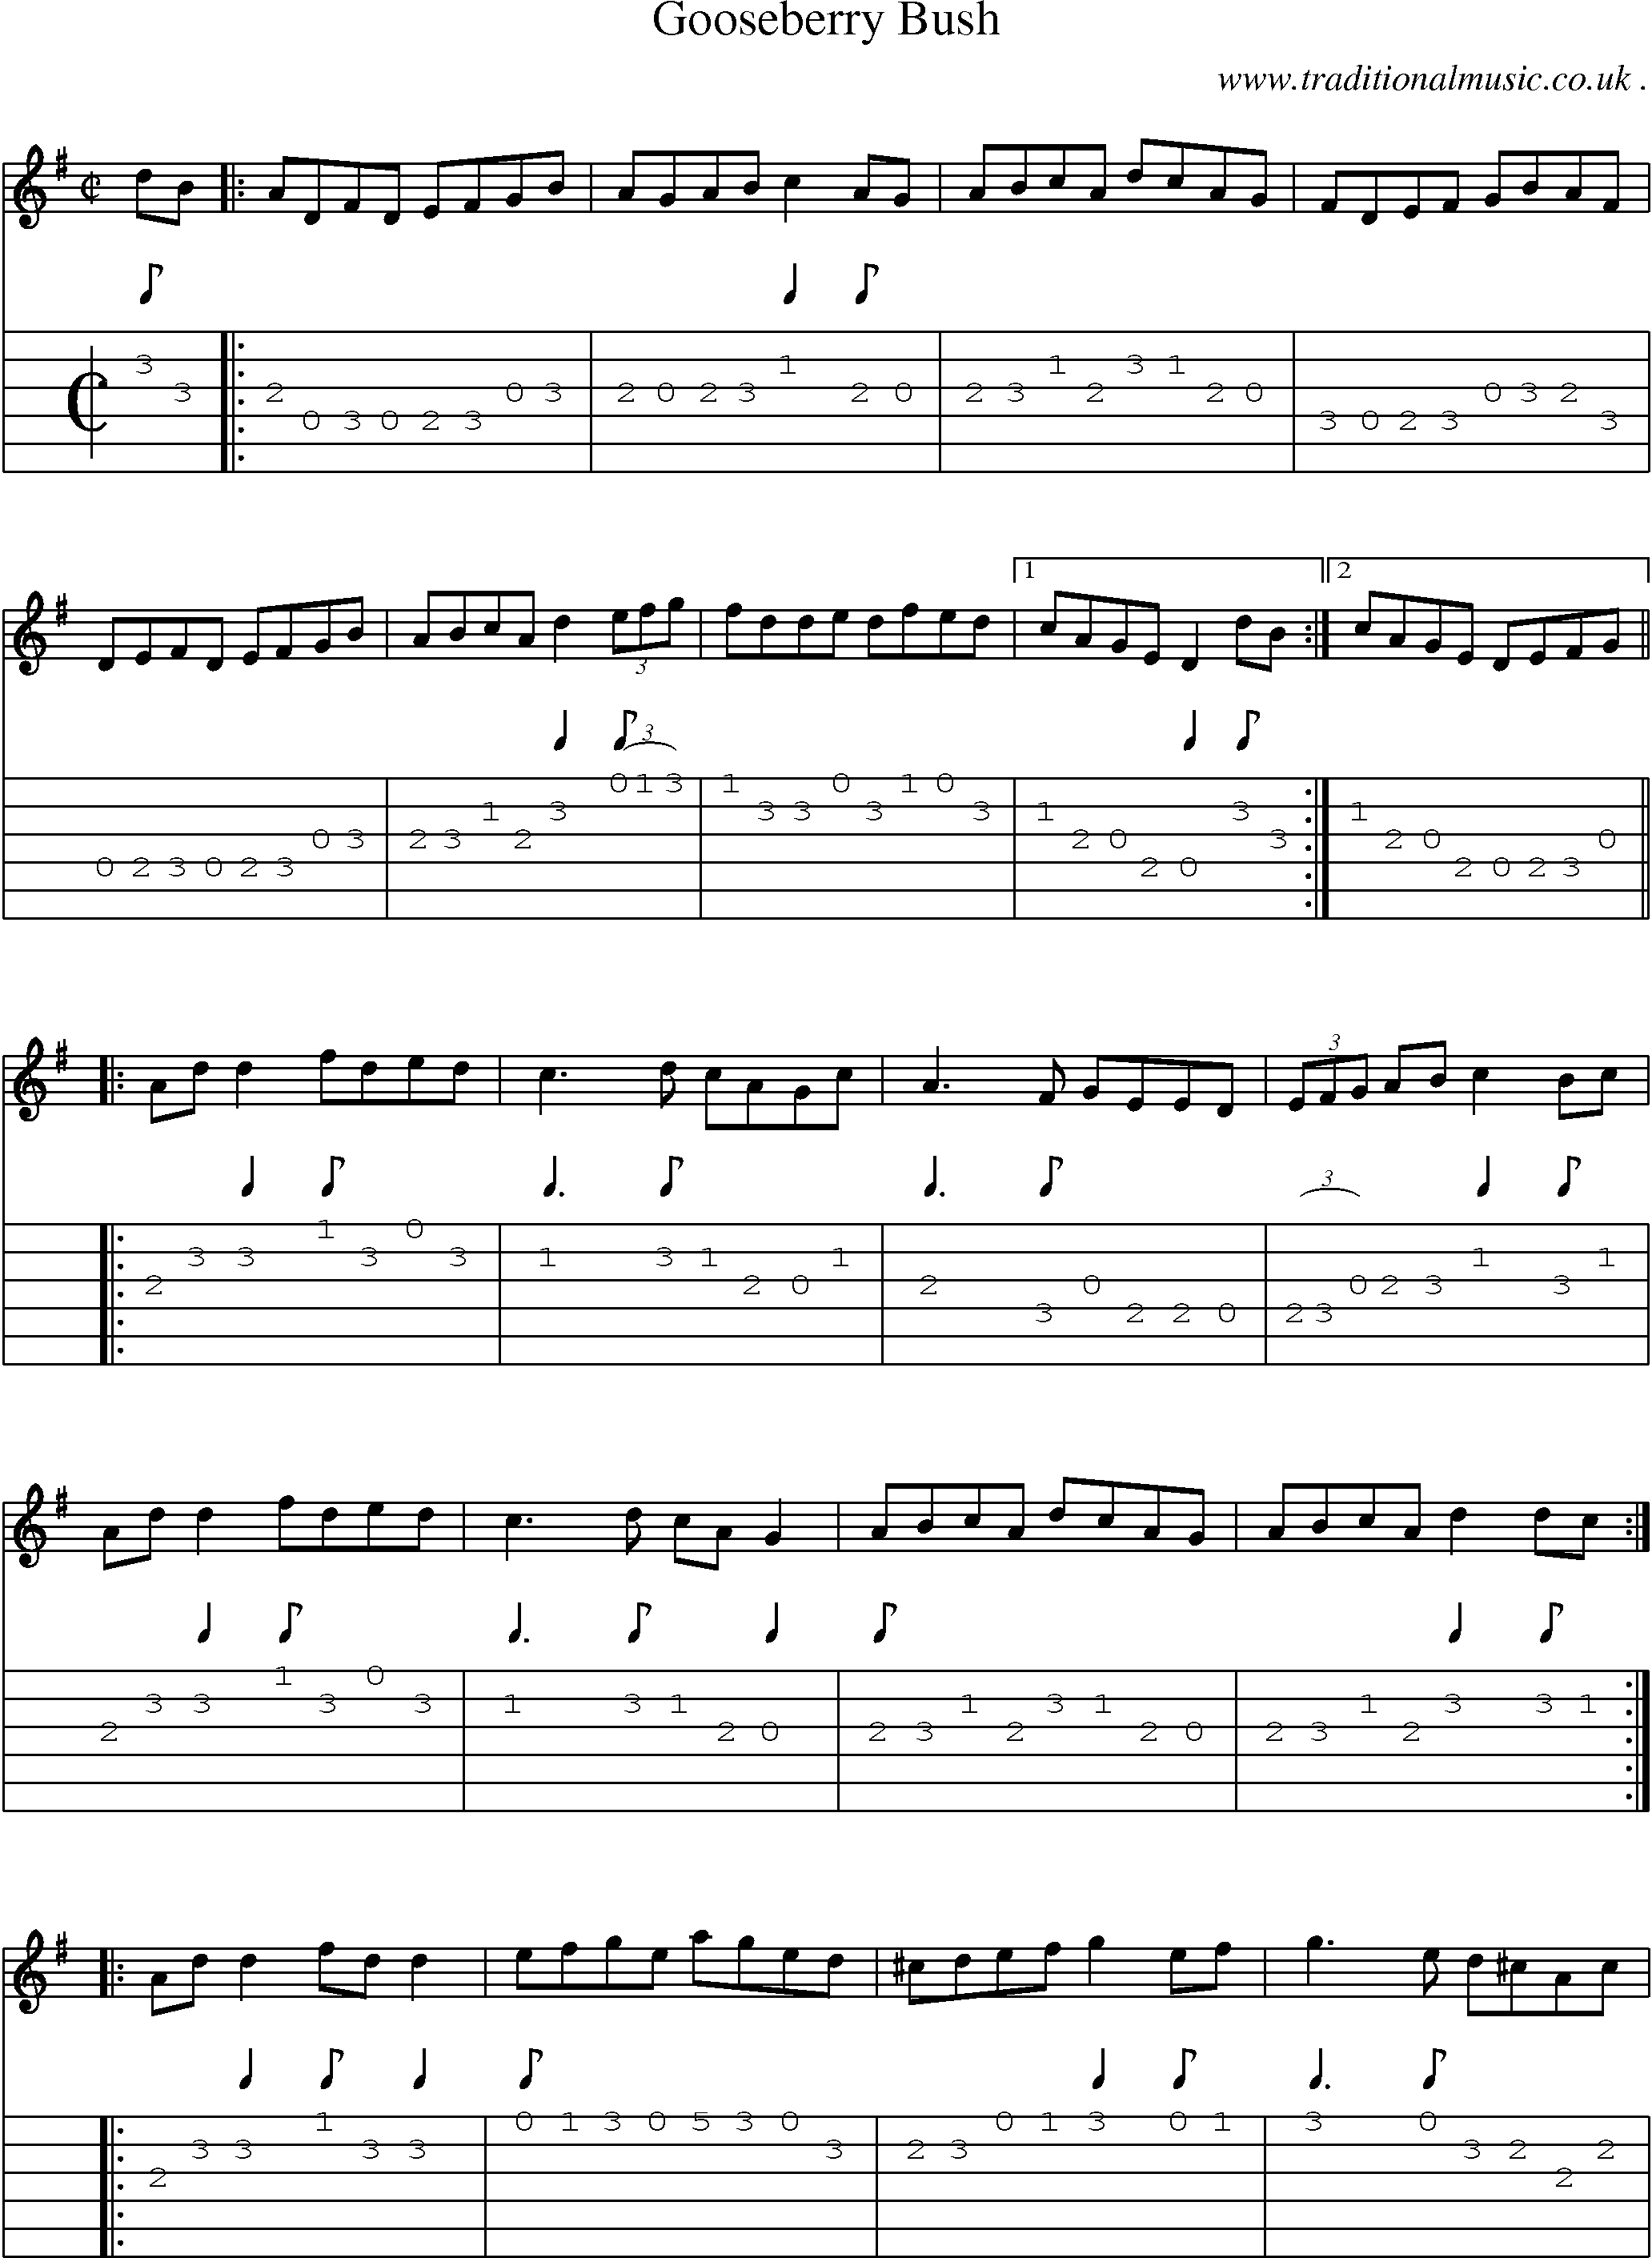 Sheet-Music and Guitar Tabs for Gooseberry Bush